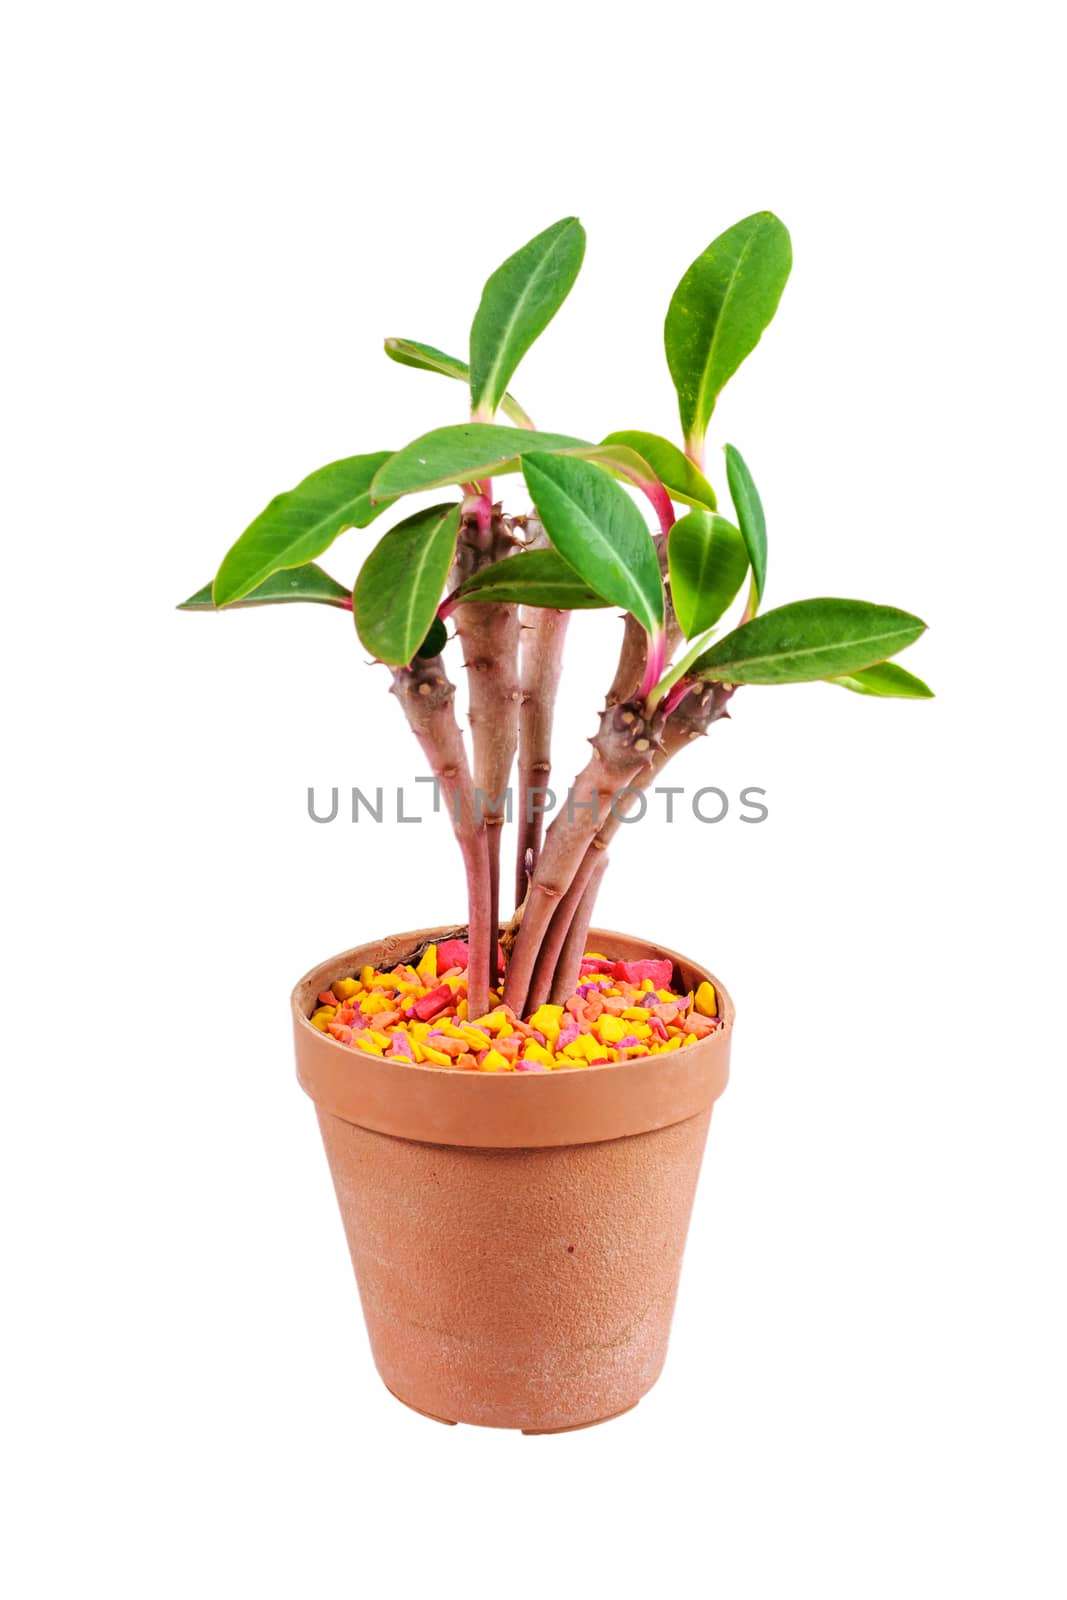 Cactus in potted by NuwatPhoto